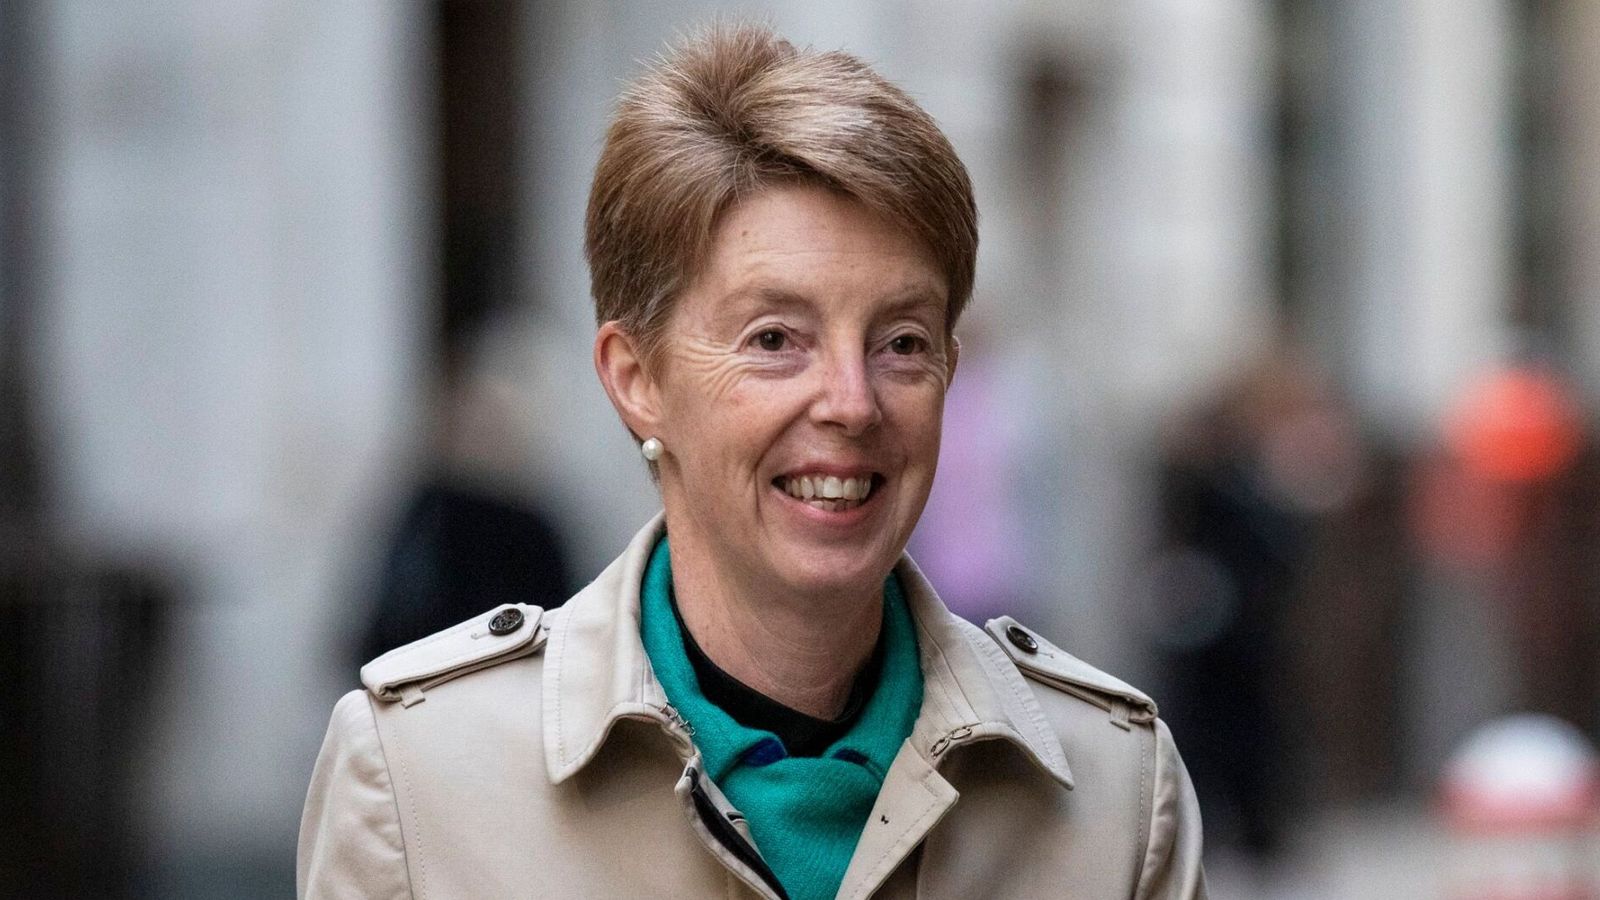 Former Post Office CEO Paula Vennells formally stripped of CBE